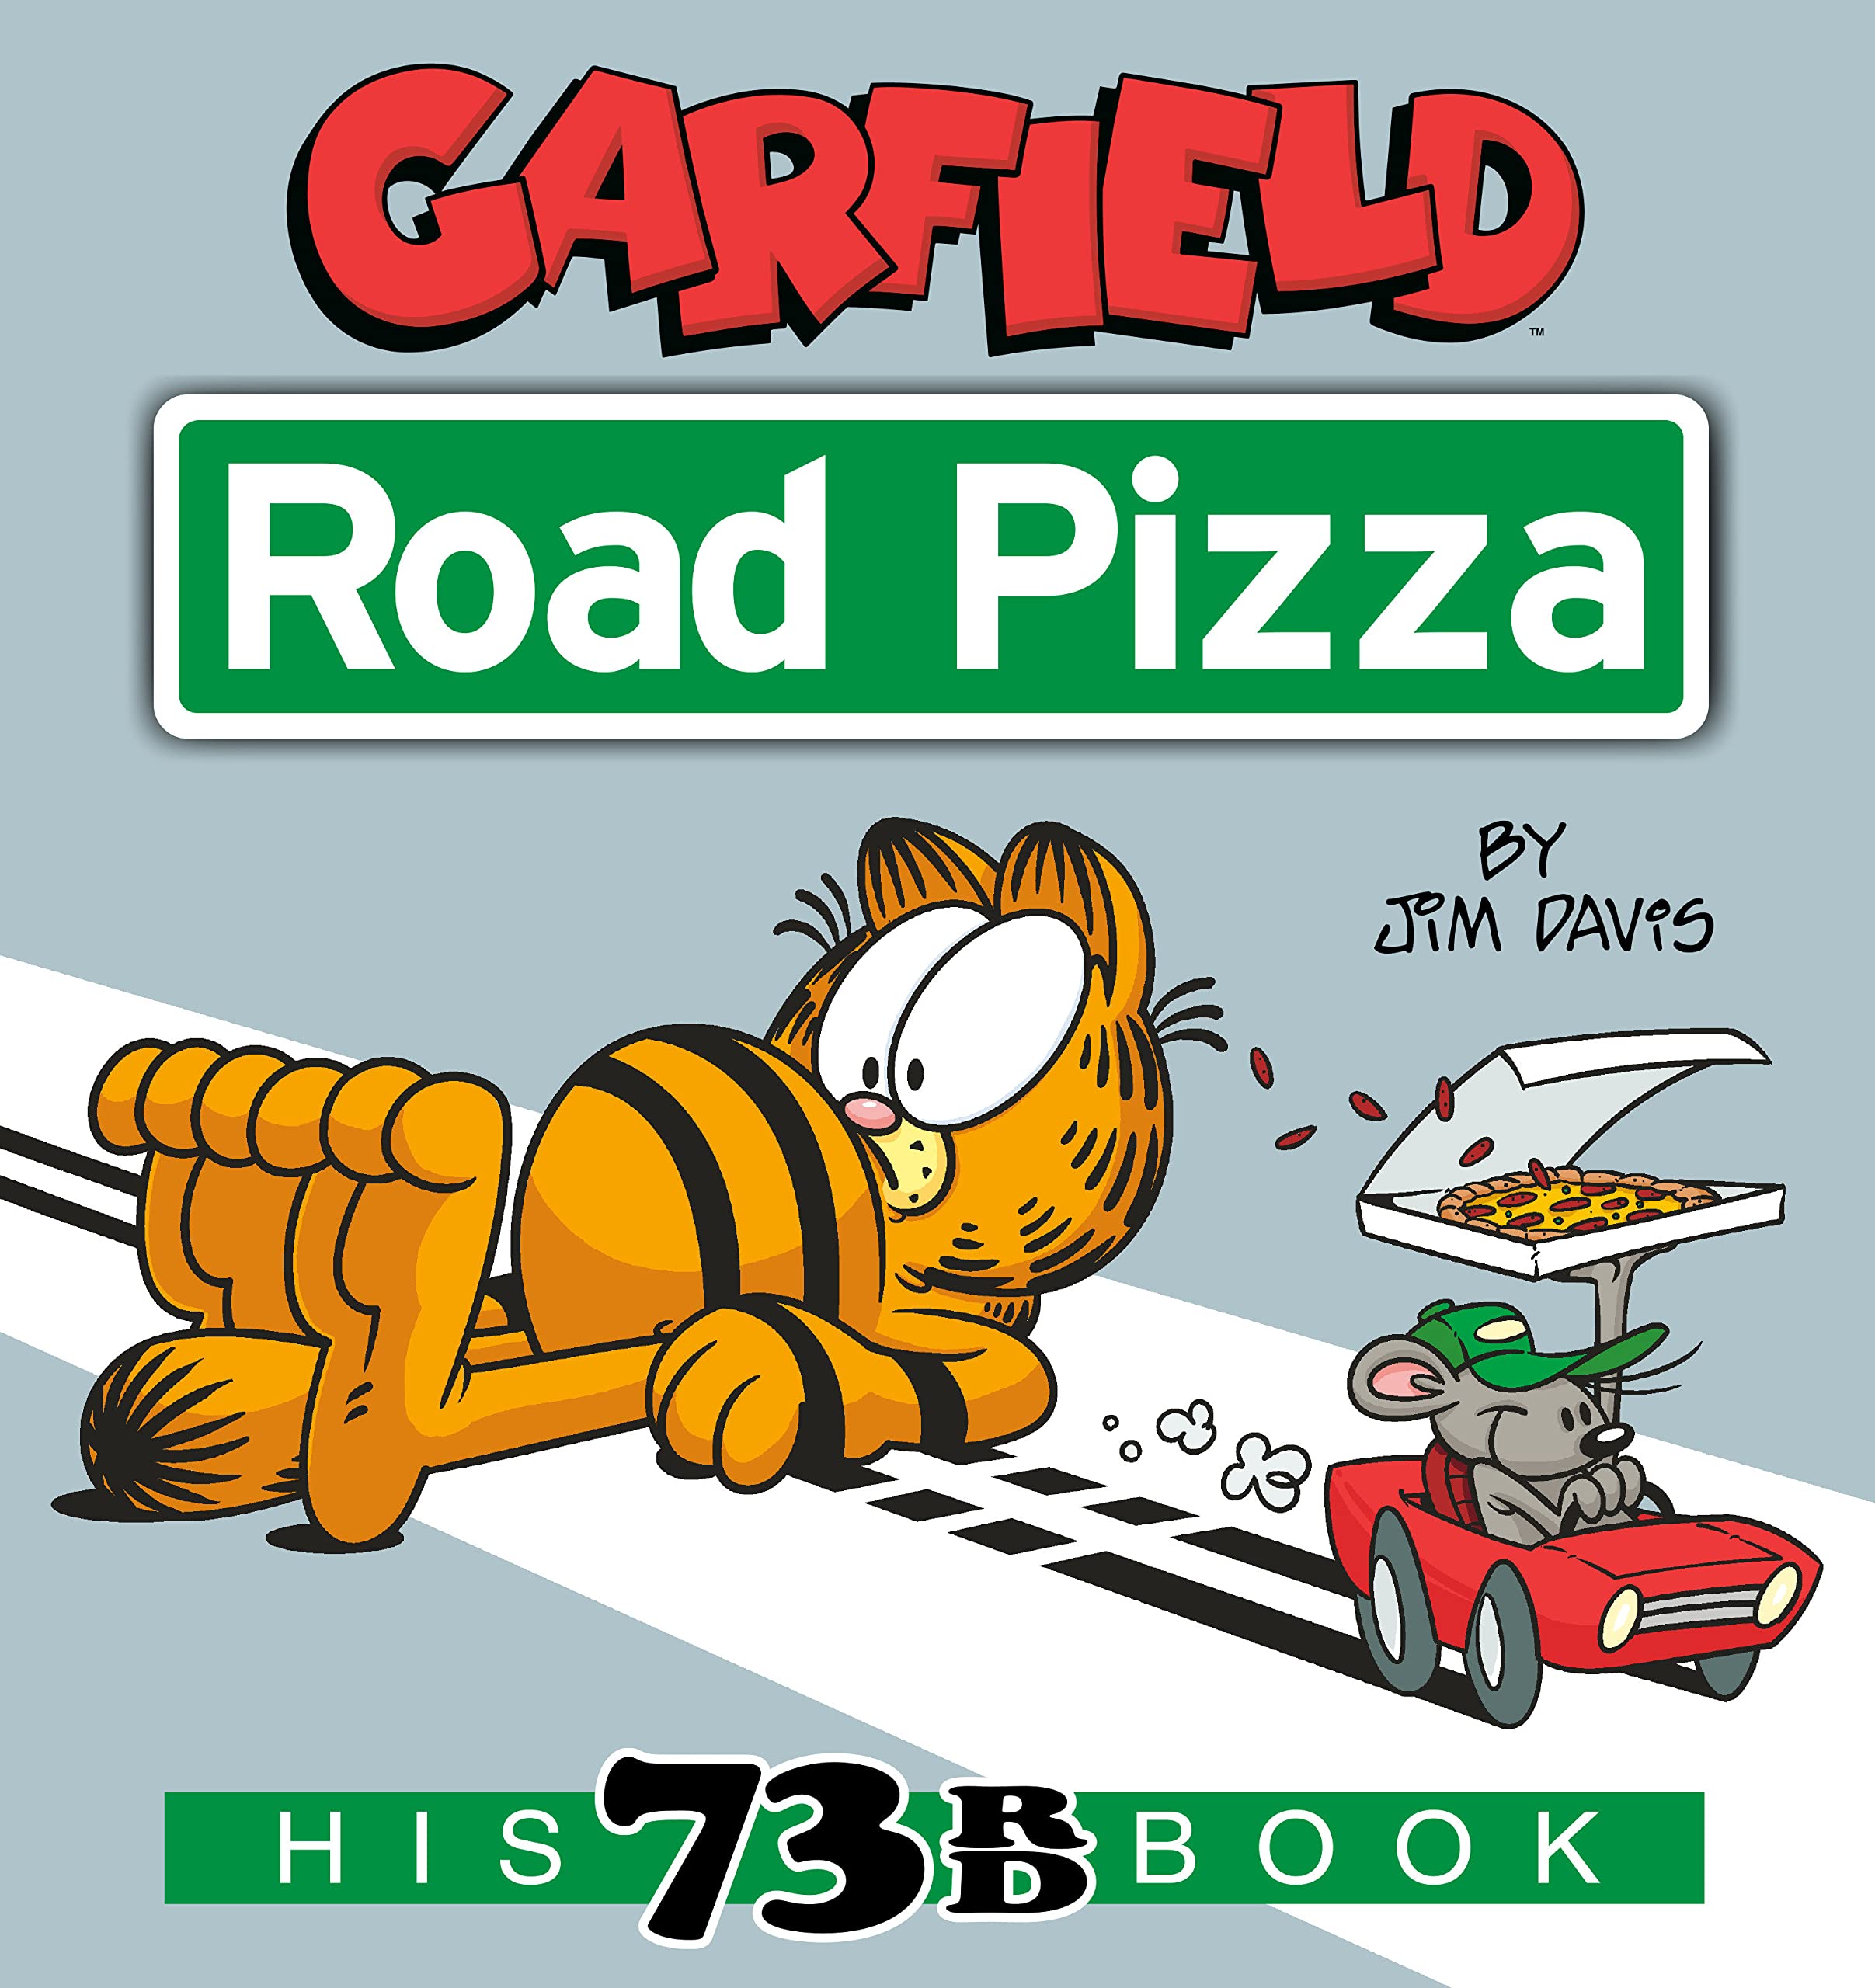 Image for "Garfield: Road Pizza"